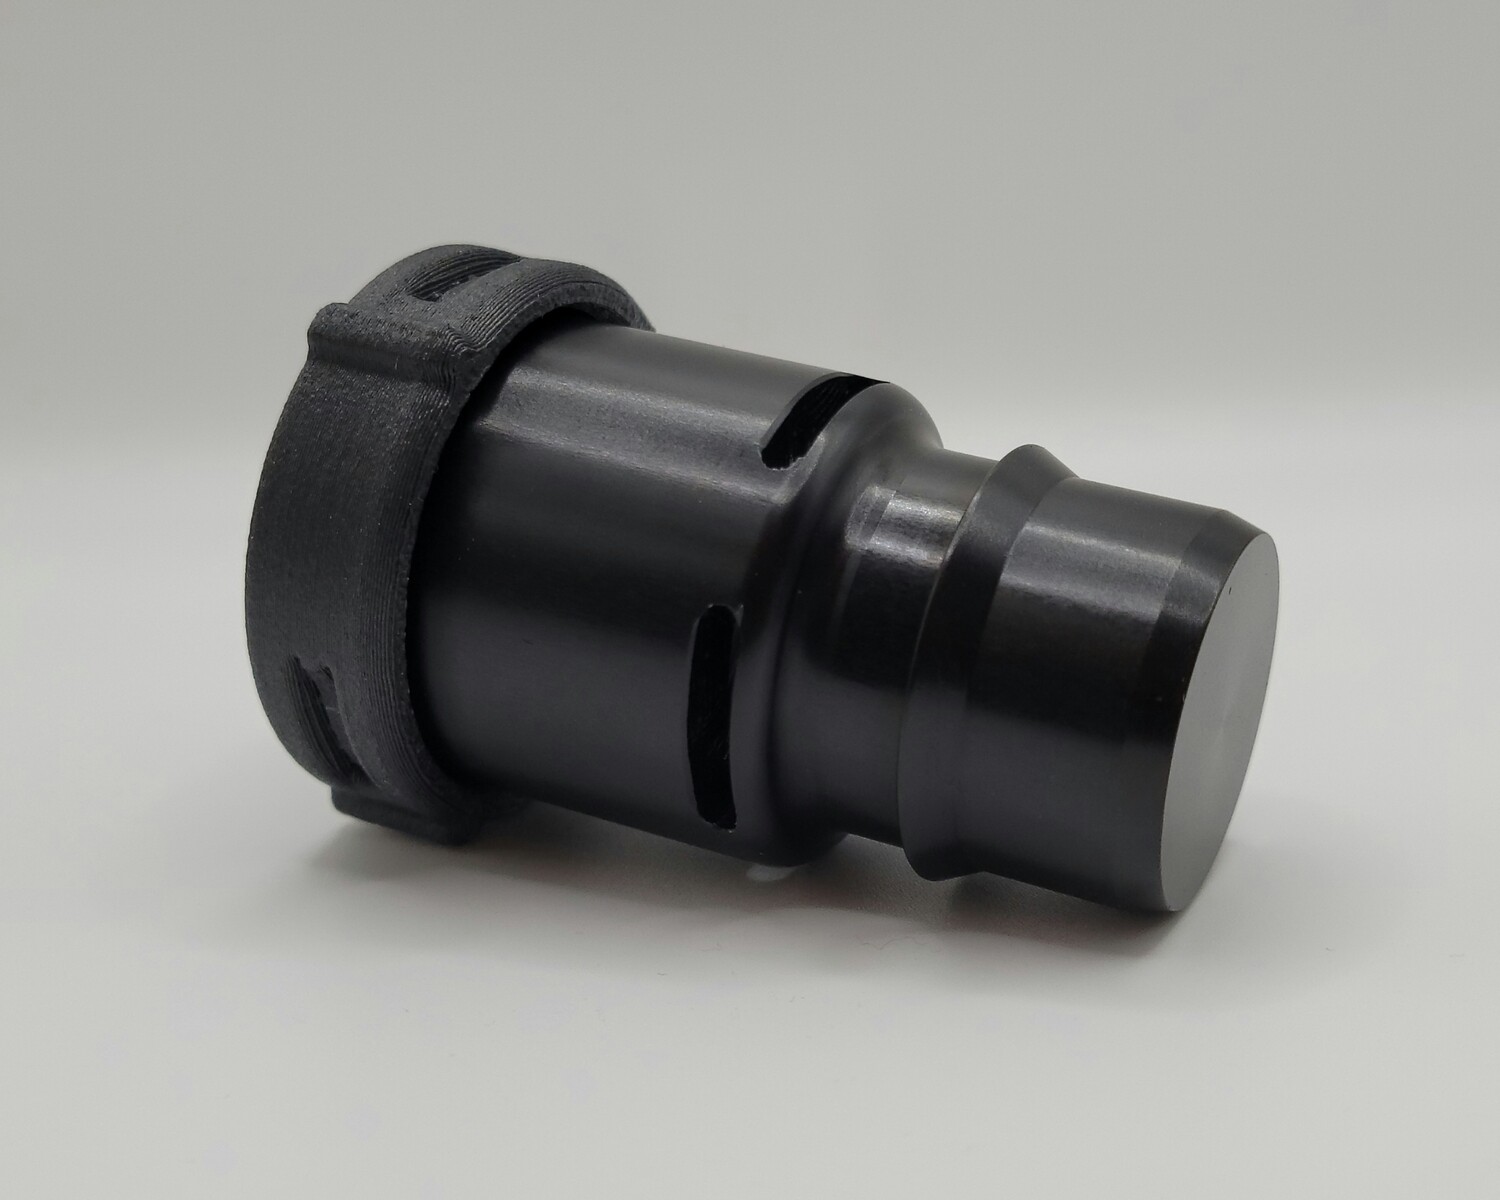 VTA Blow-Off Valve Adapter (CNC Machined 6061-T6 Billet Aluminum in a Black Anodized Finish)